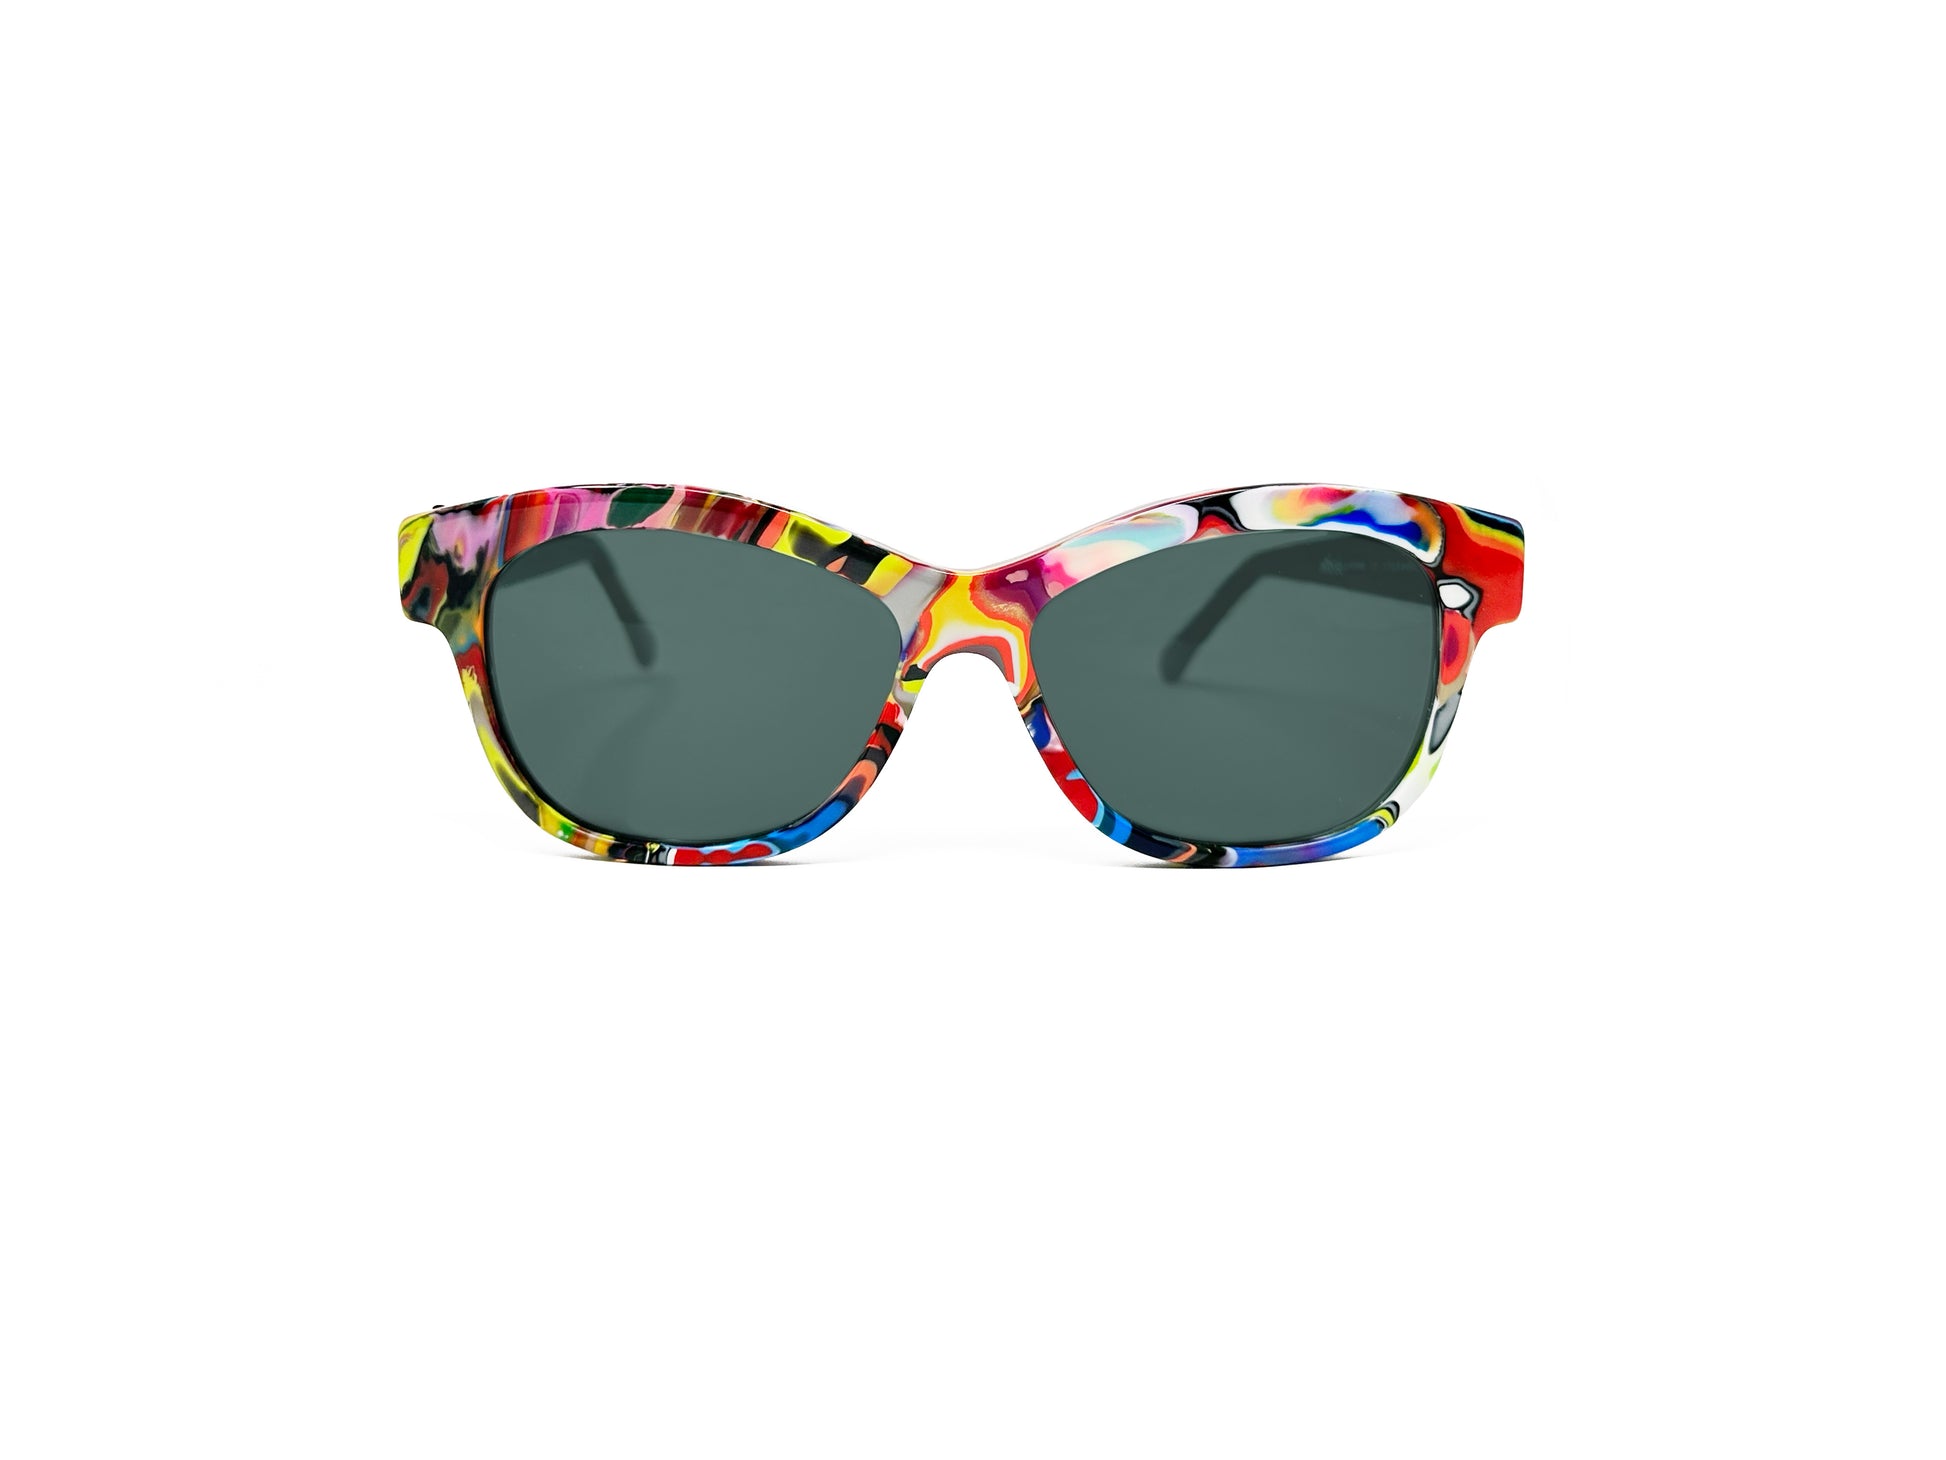 Viktlos rounded-square, recycled acetate sunglass. Model: RC013. Color: 1424 - Multi-colored swirls. Front view. 